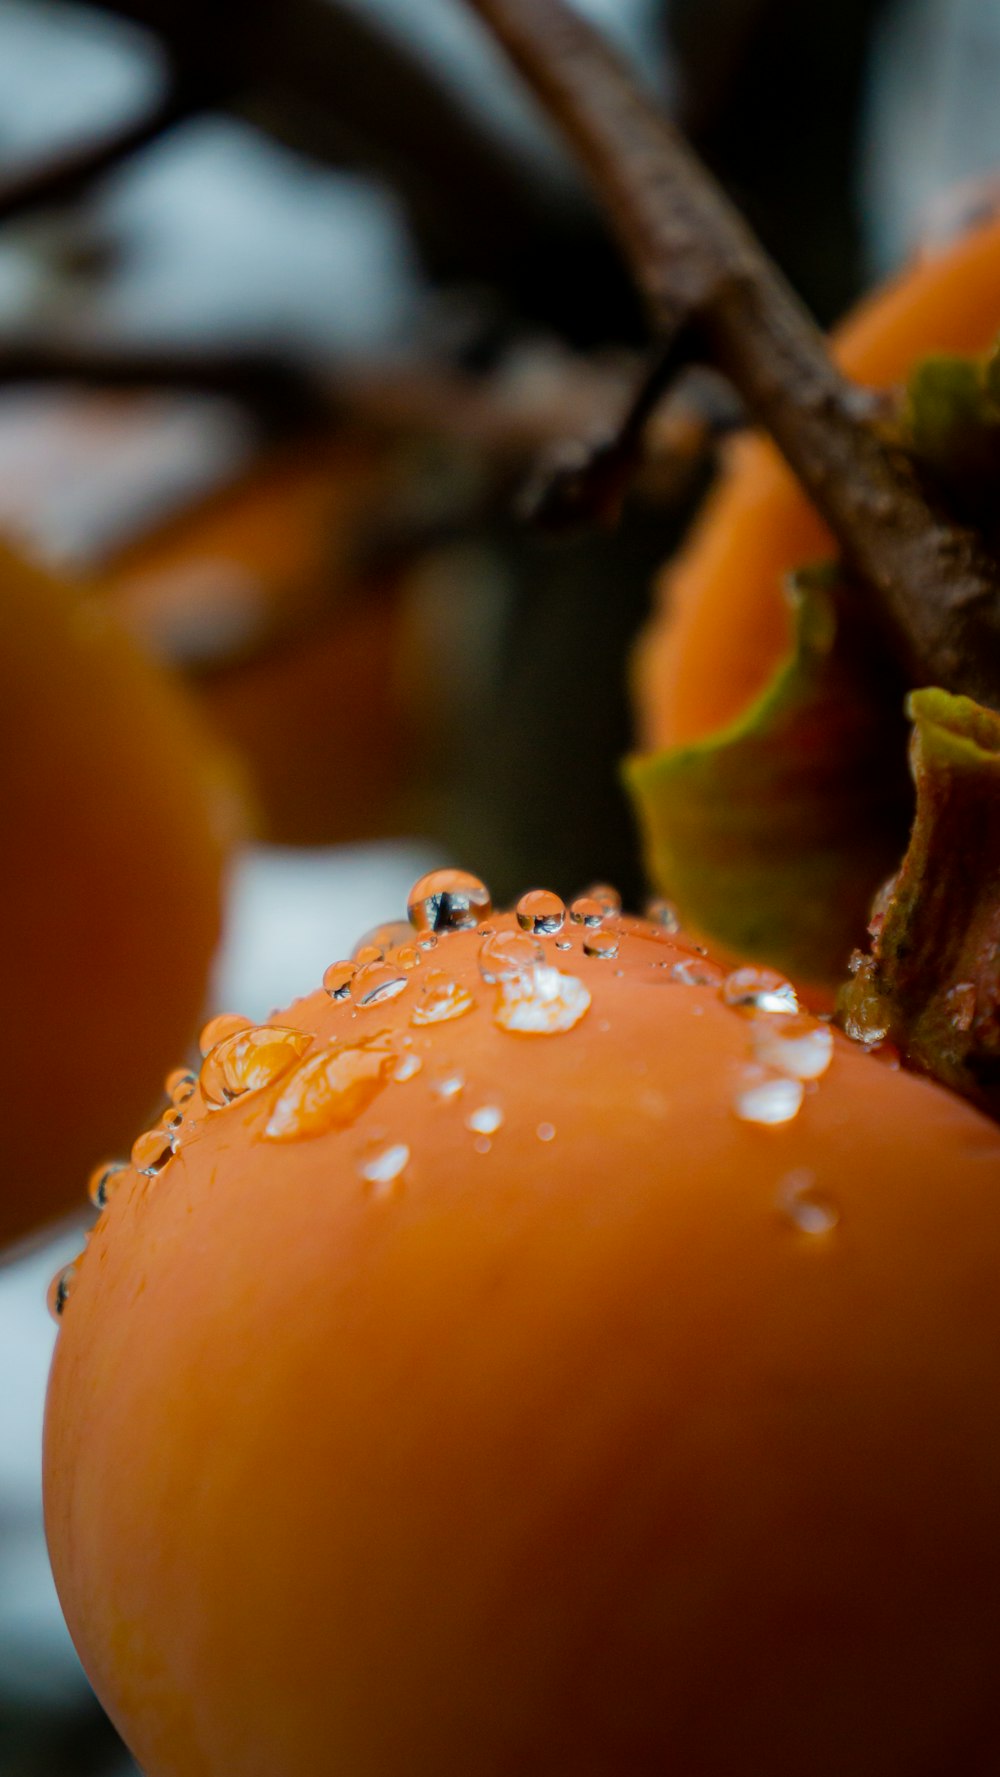 a close up of a bunch of oranges with drops of water on them